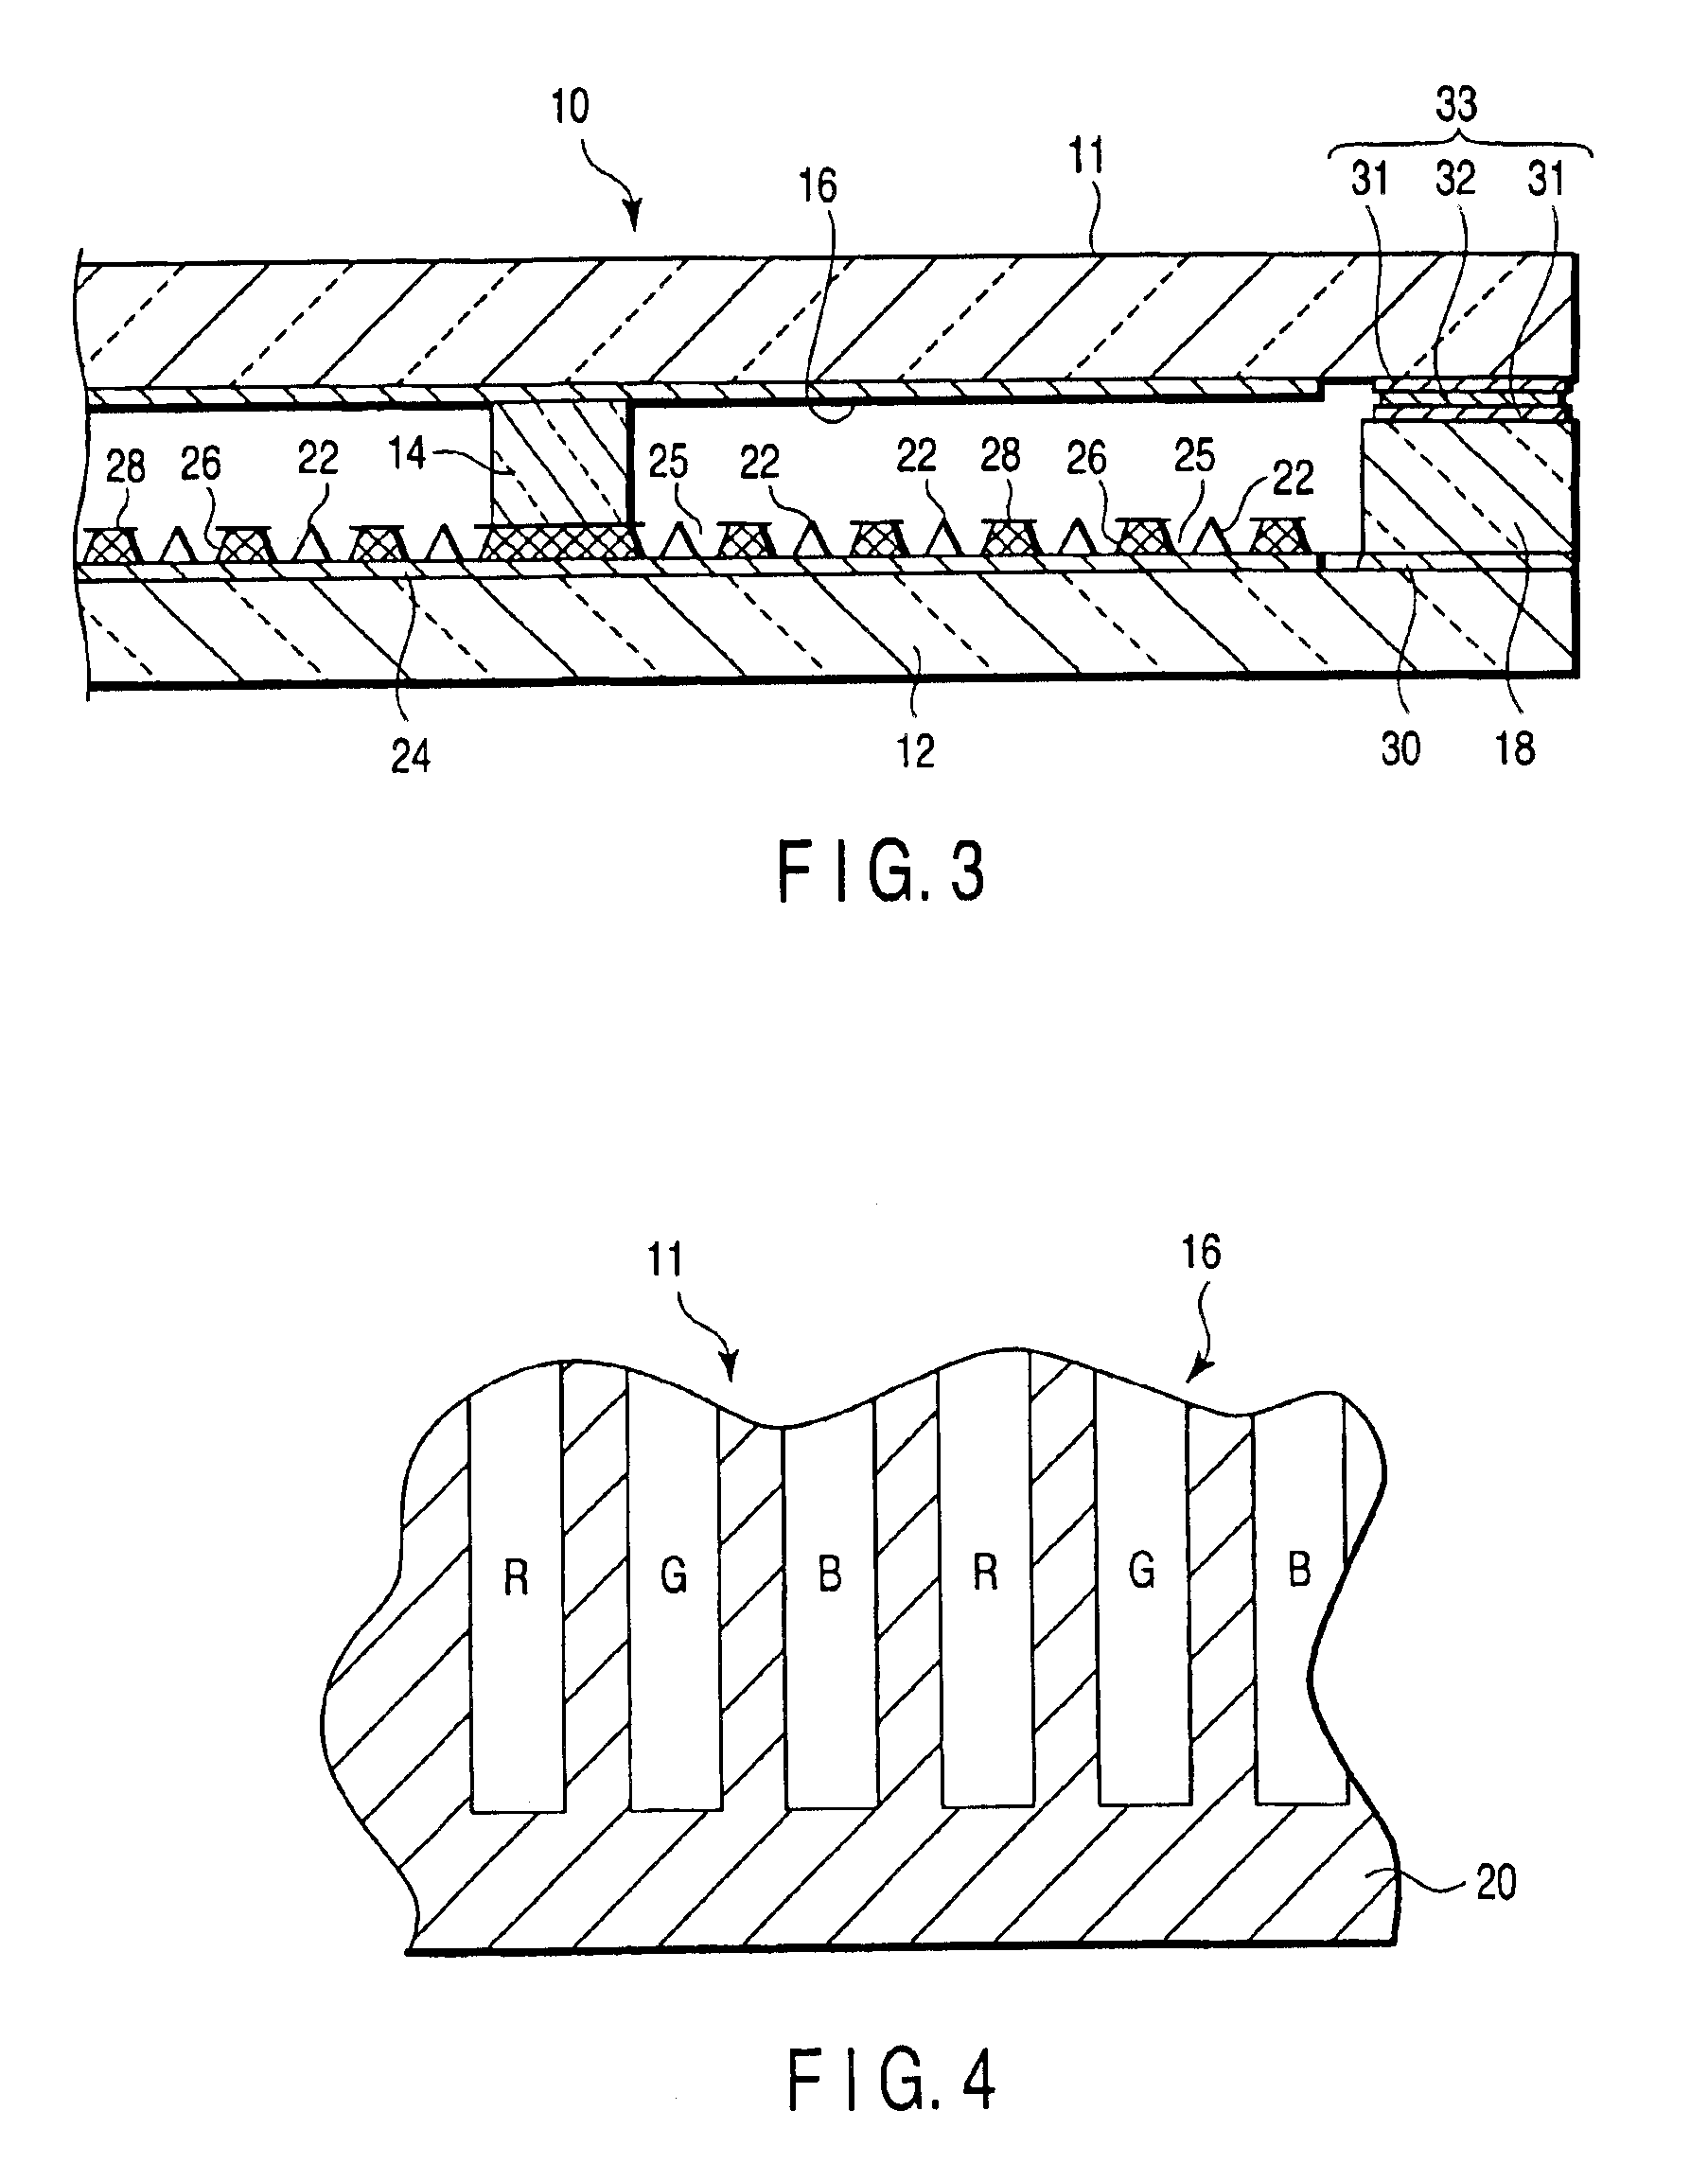 Image display apparatus and method of manufacturing the same